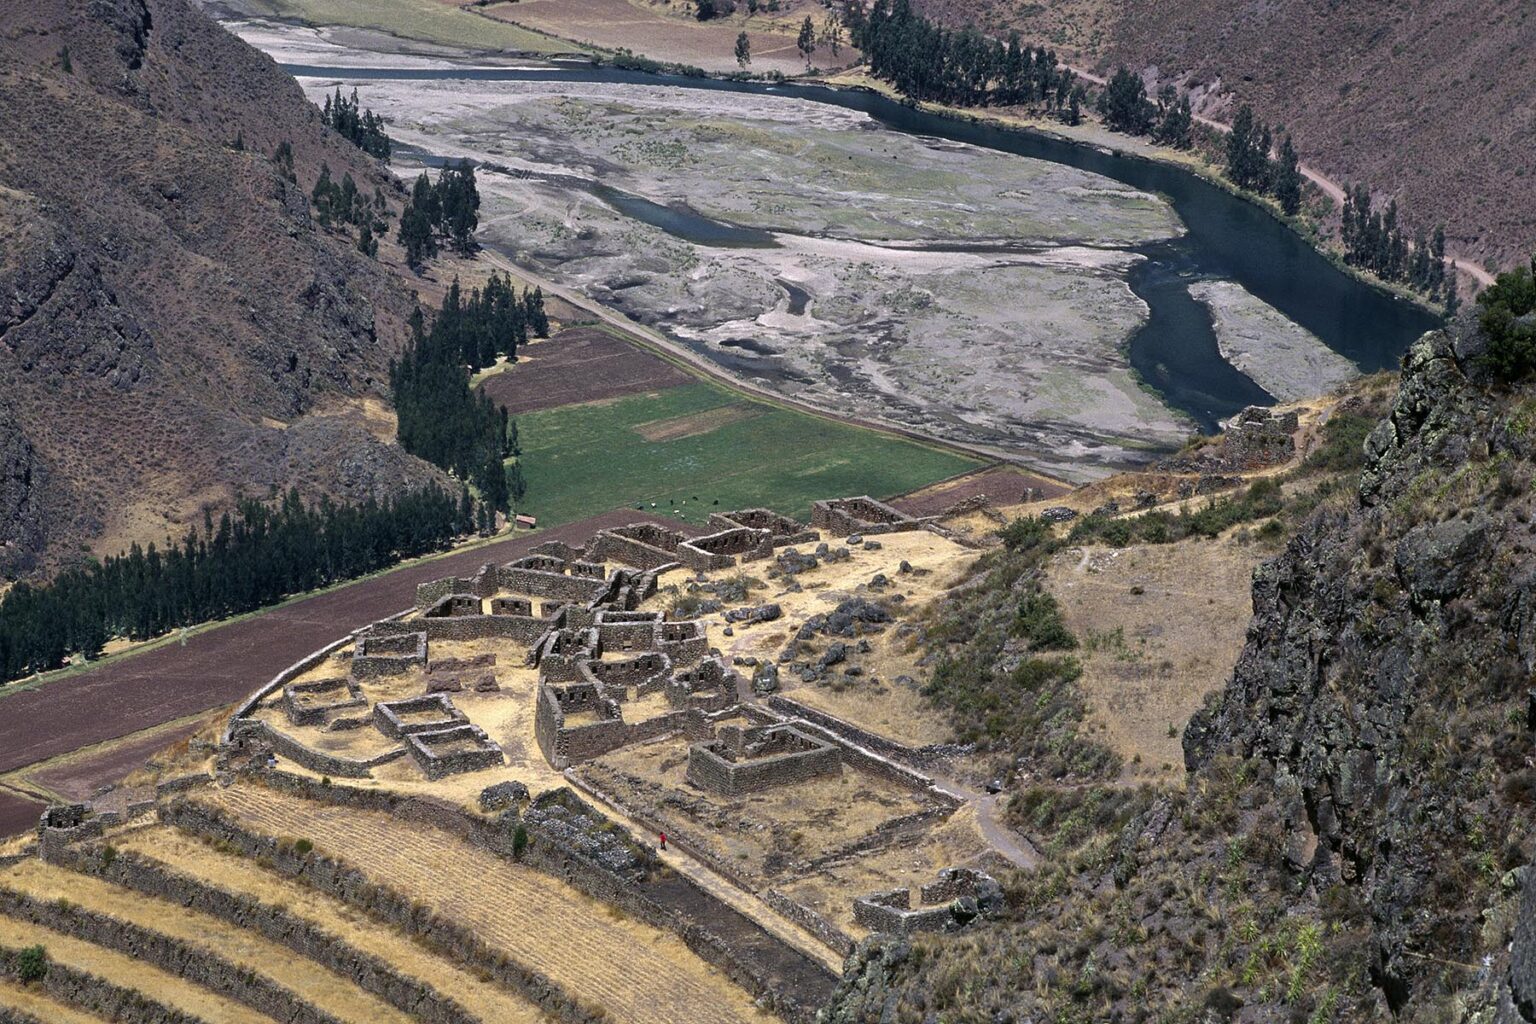 The P'ISACA section of PISAC probably housed the nobility of INCA society - THE SACRED VALLEY, PERU